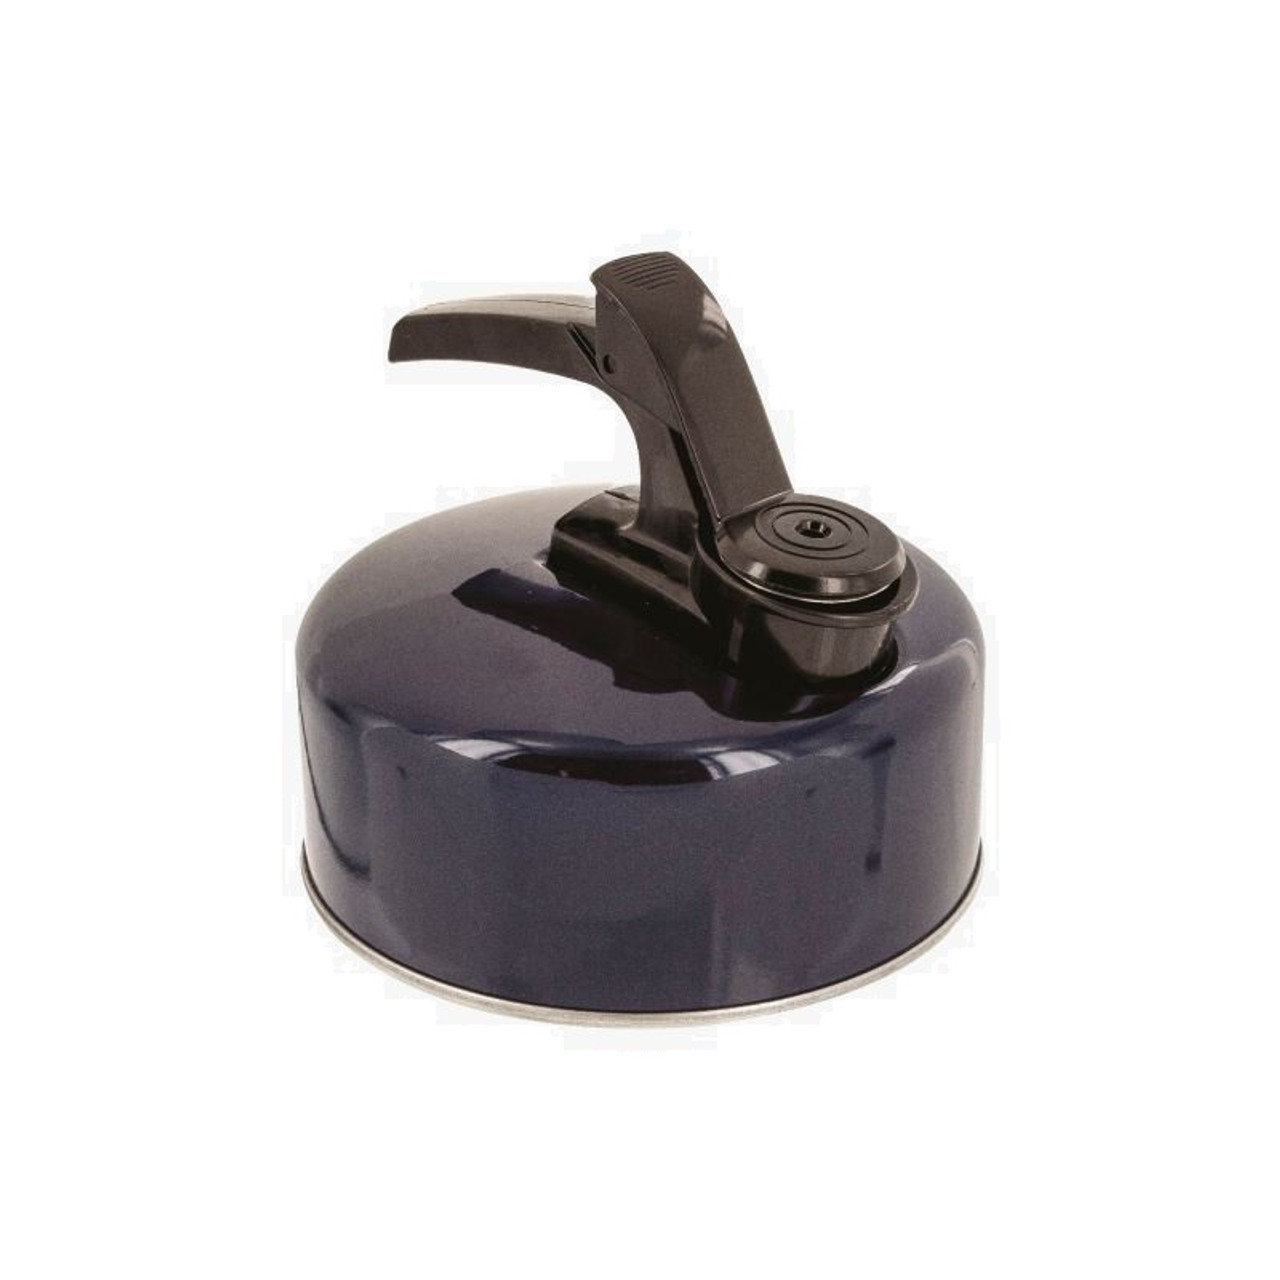 Aluminium Whistling Kettle - 1Litre camping kettle with whistle, dark navy